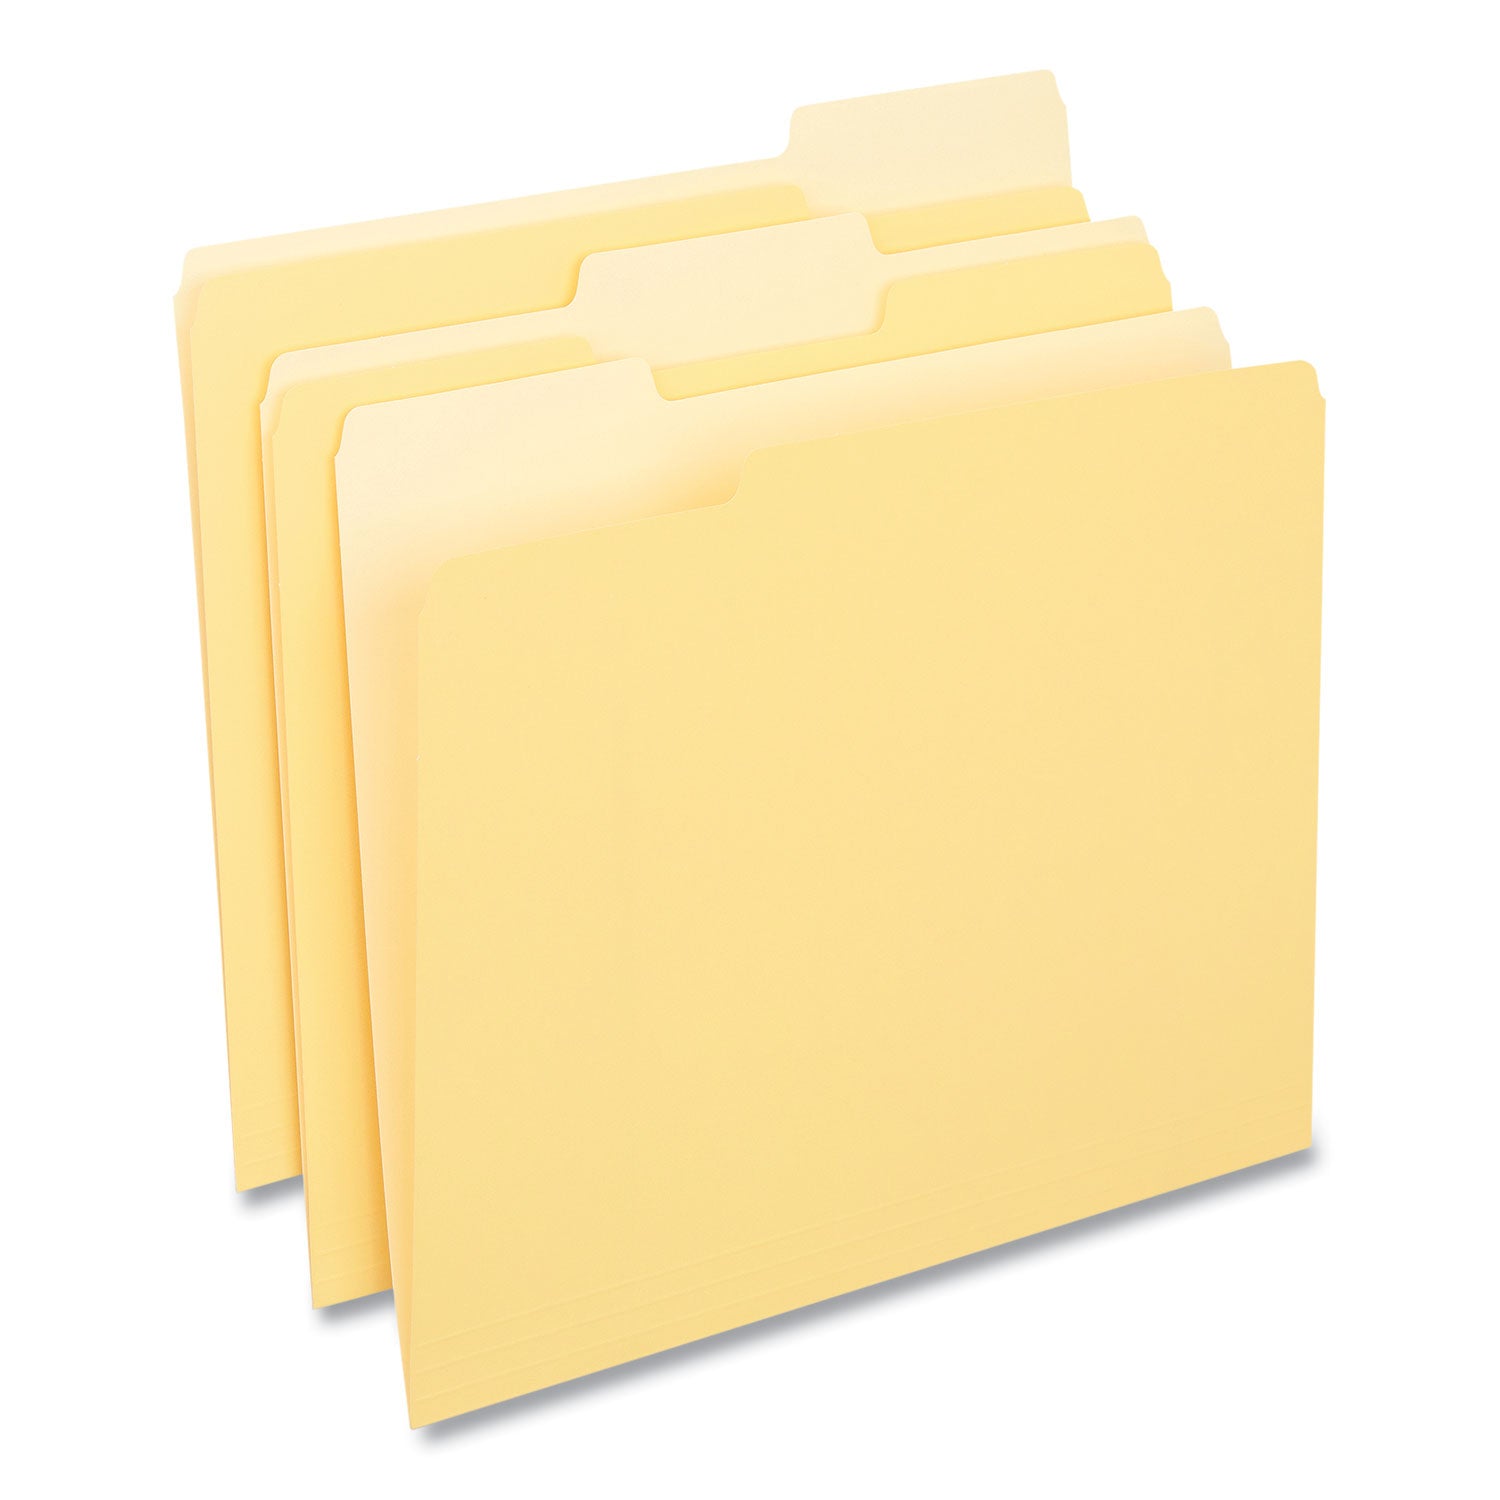 Deluxe Colored Top Tab File Folders, 1/3-Cut Tabs: Assorted, Letter Size, Yellow/Light Yellow, 100/Box - 